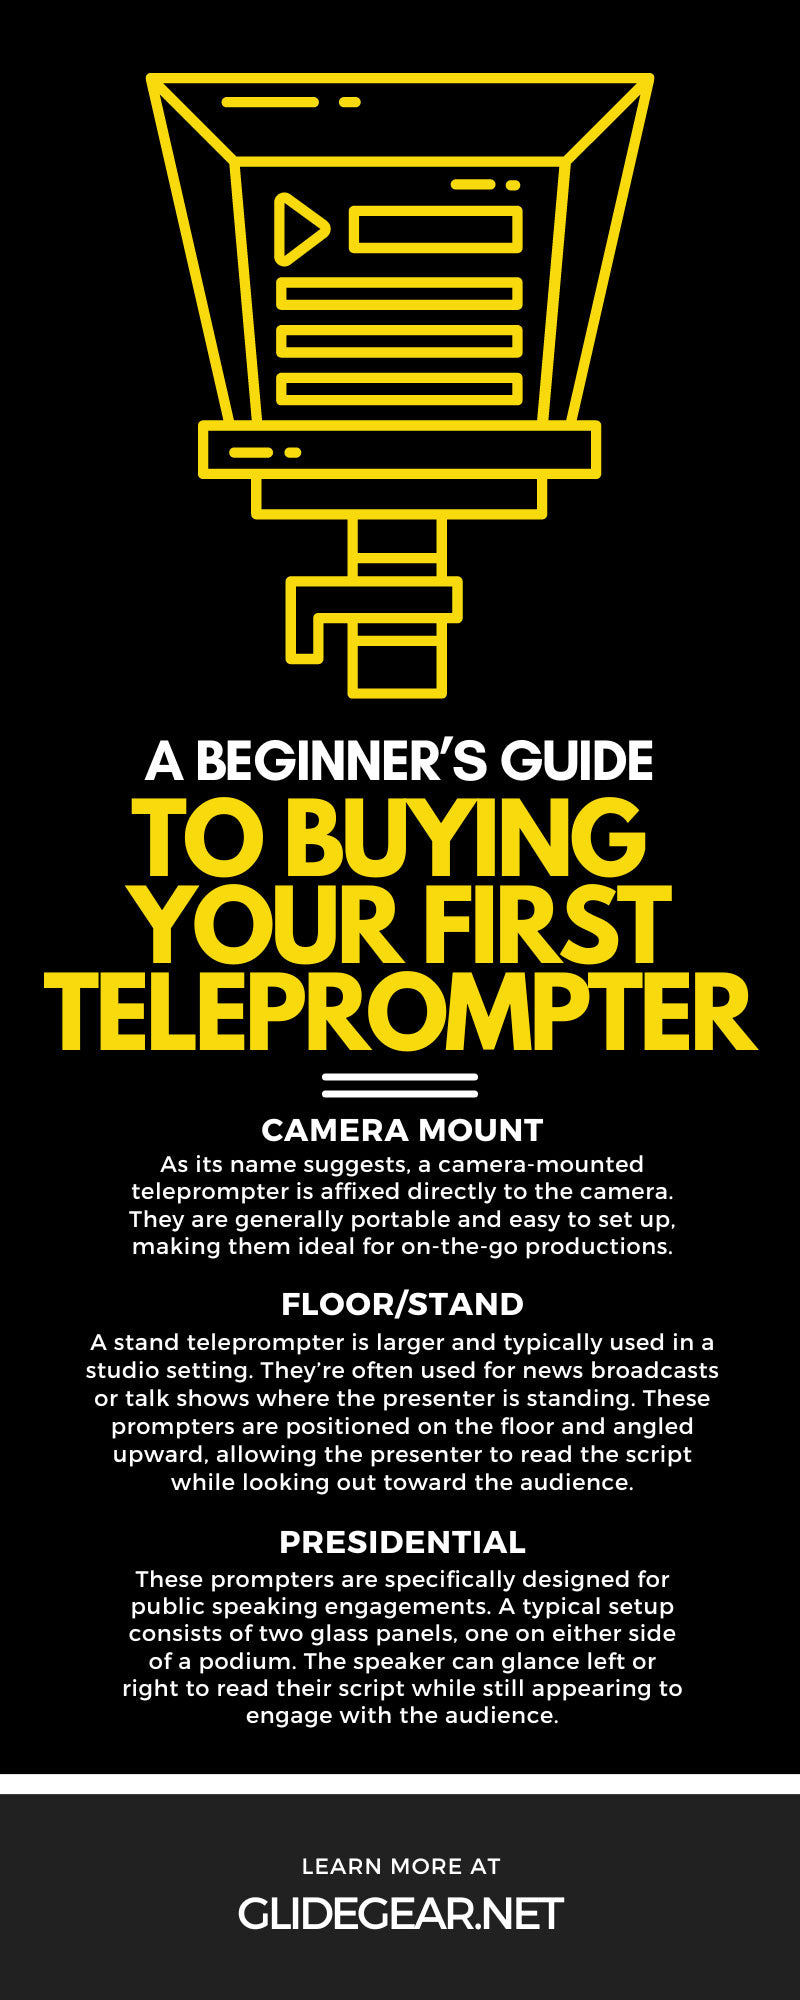 A Beginner’s Guide to Buying Your First Teleprompter